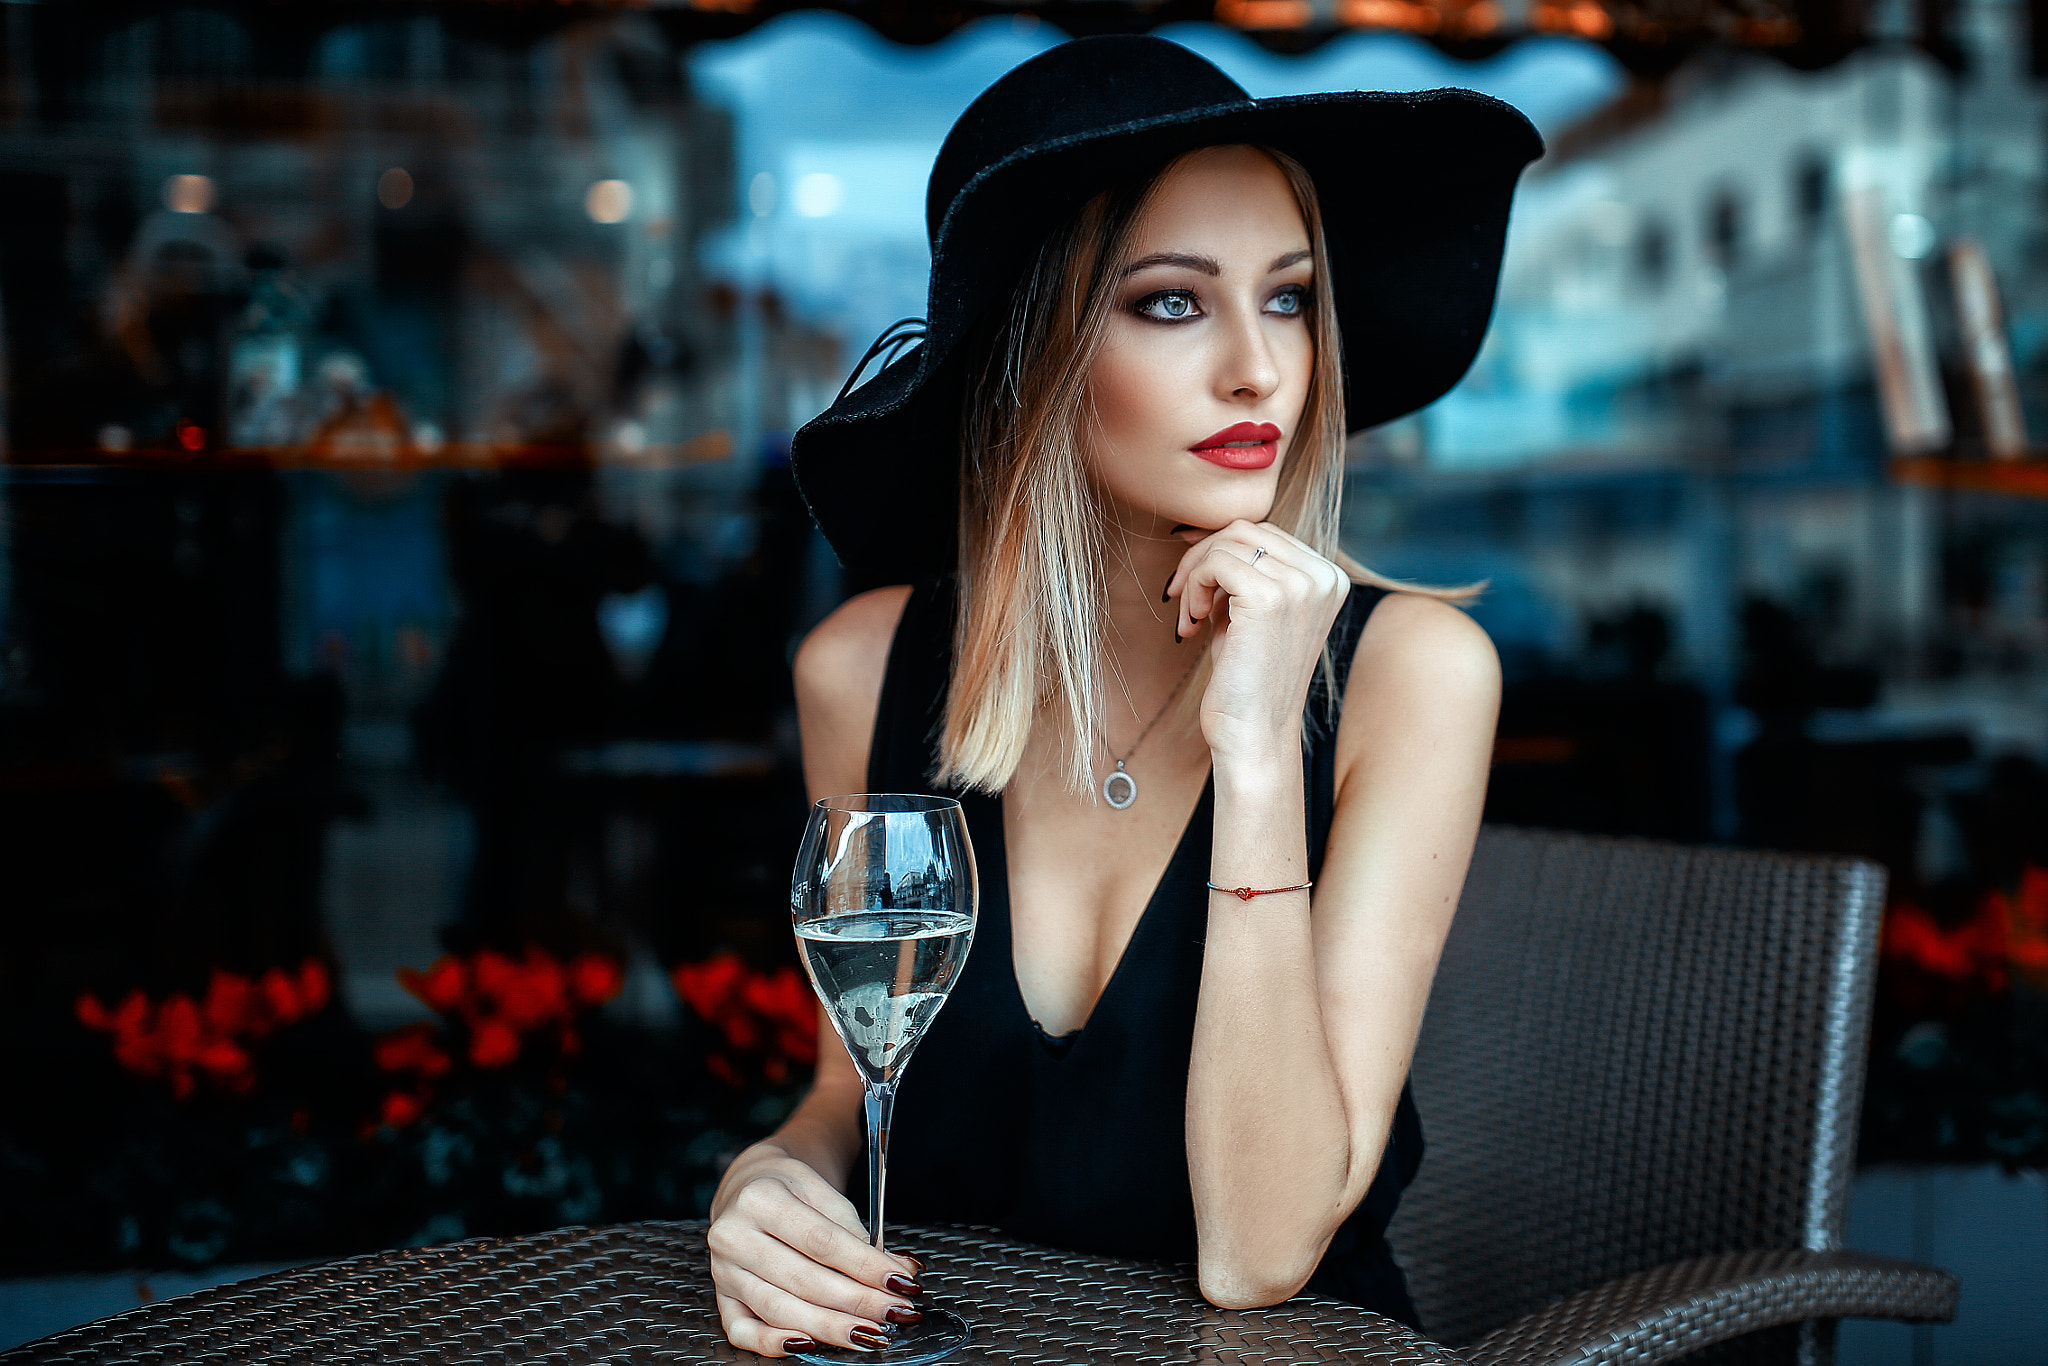 People 2048x1366 women hat blue eyes painted nails chair table blonde drinking glass depth of field Alessandro Di Cicco red lipstick necklace looking away black hat women with hats